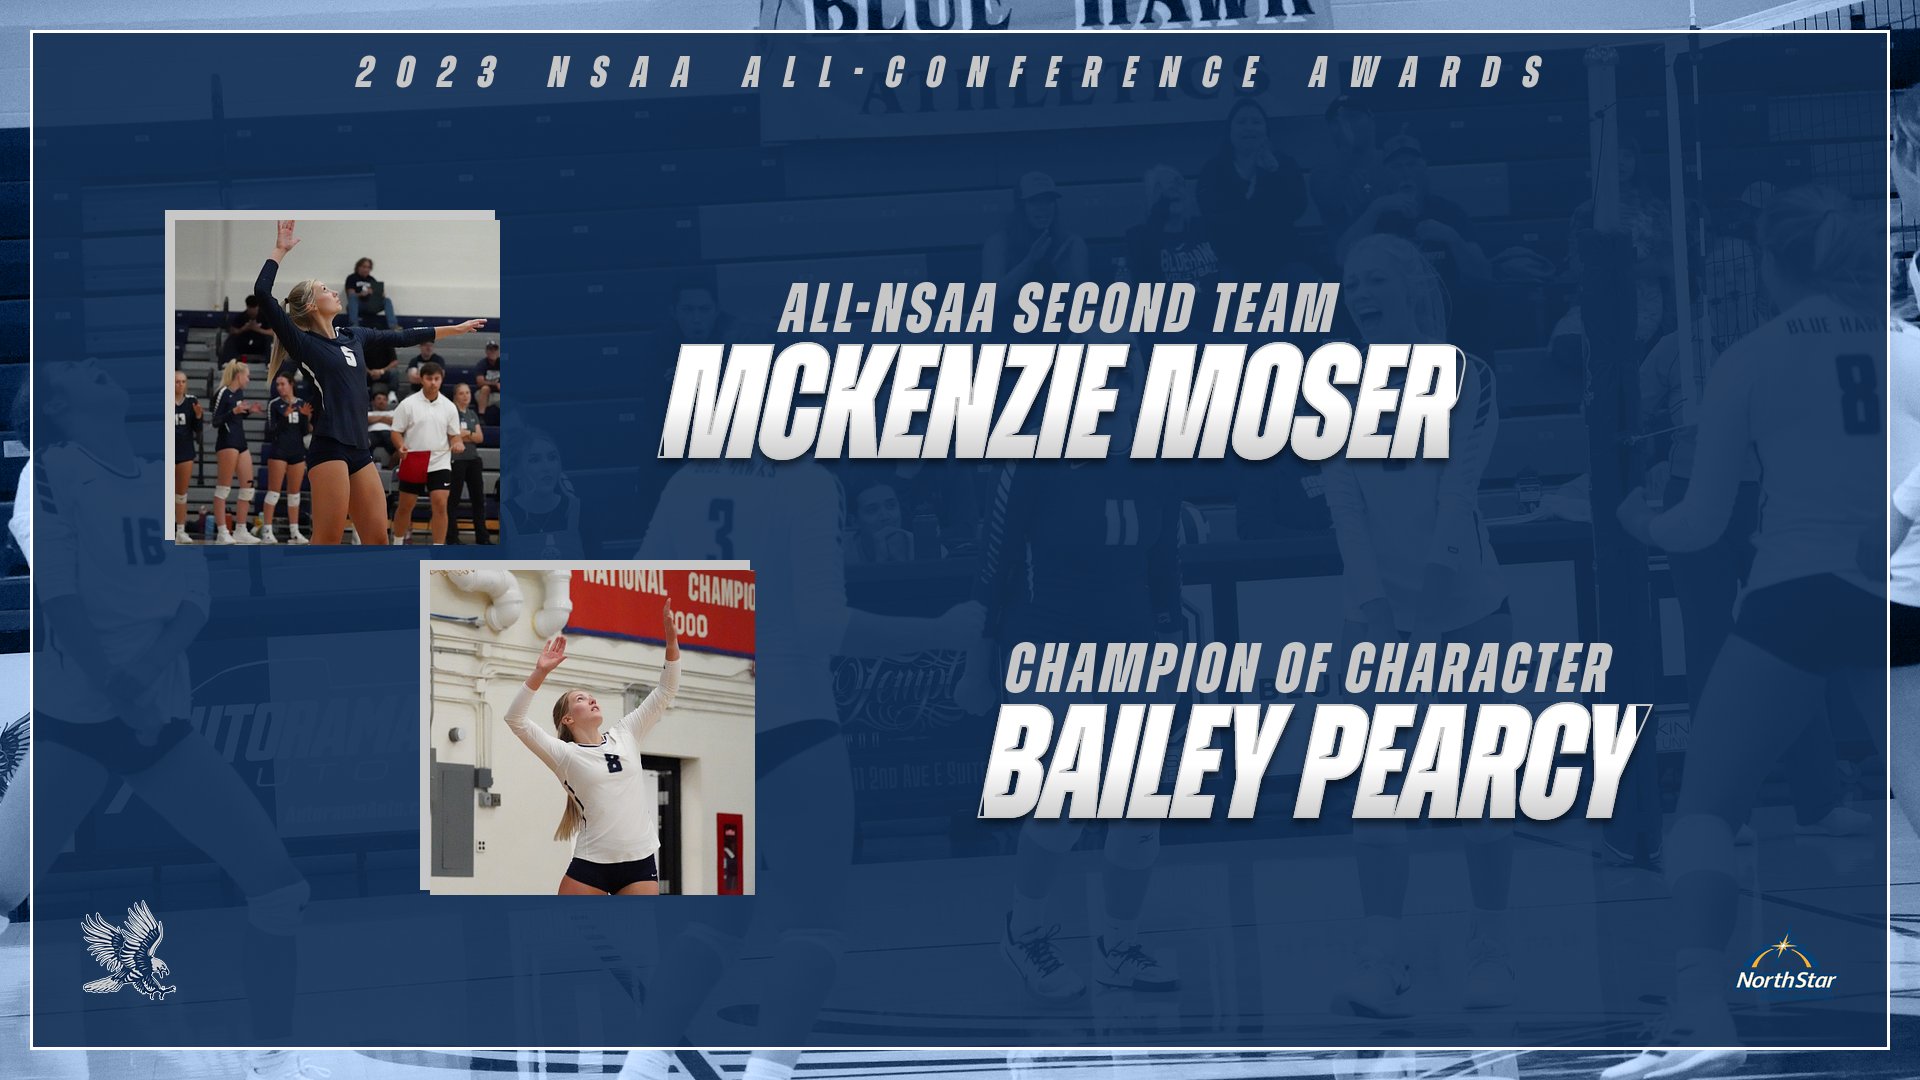 Moser lands second team All-NSAA honors, Pearcy named Champion of Character